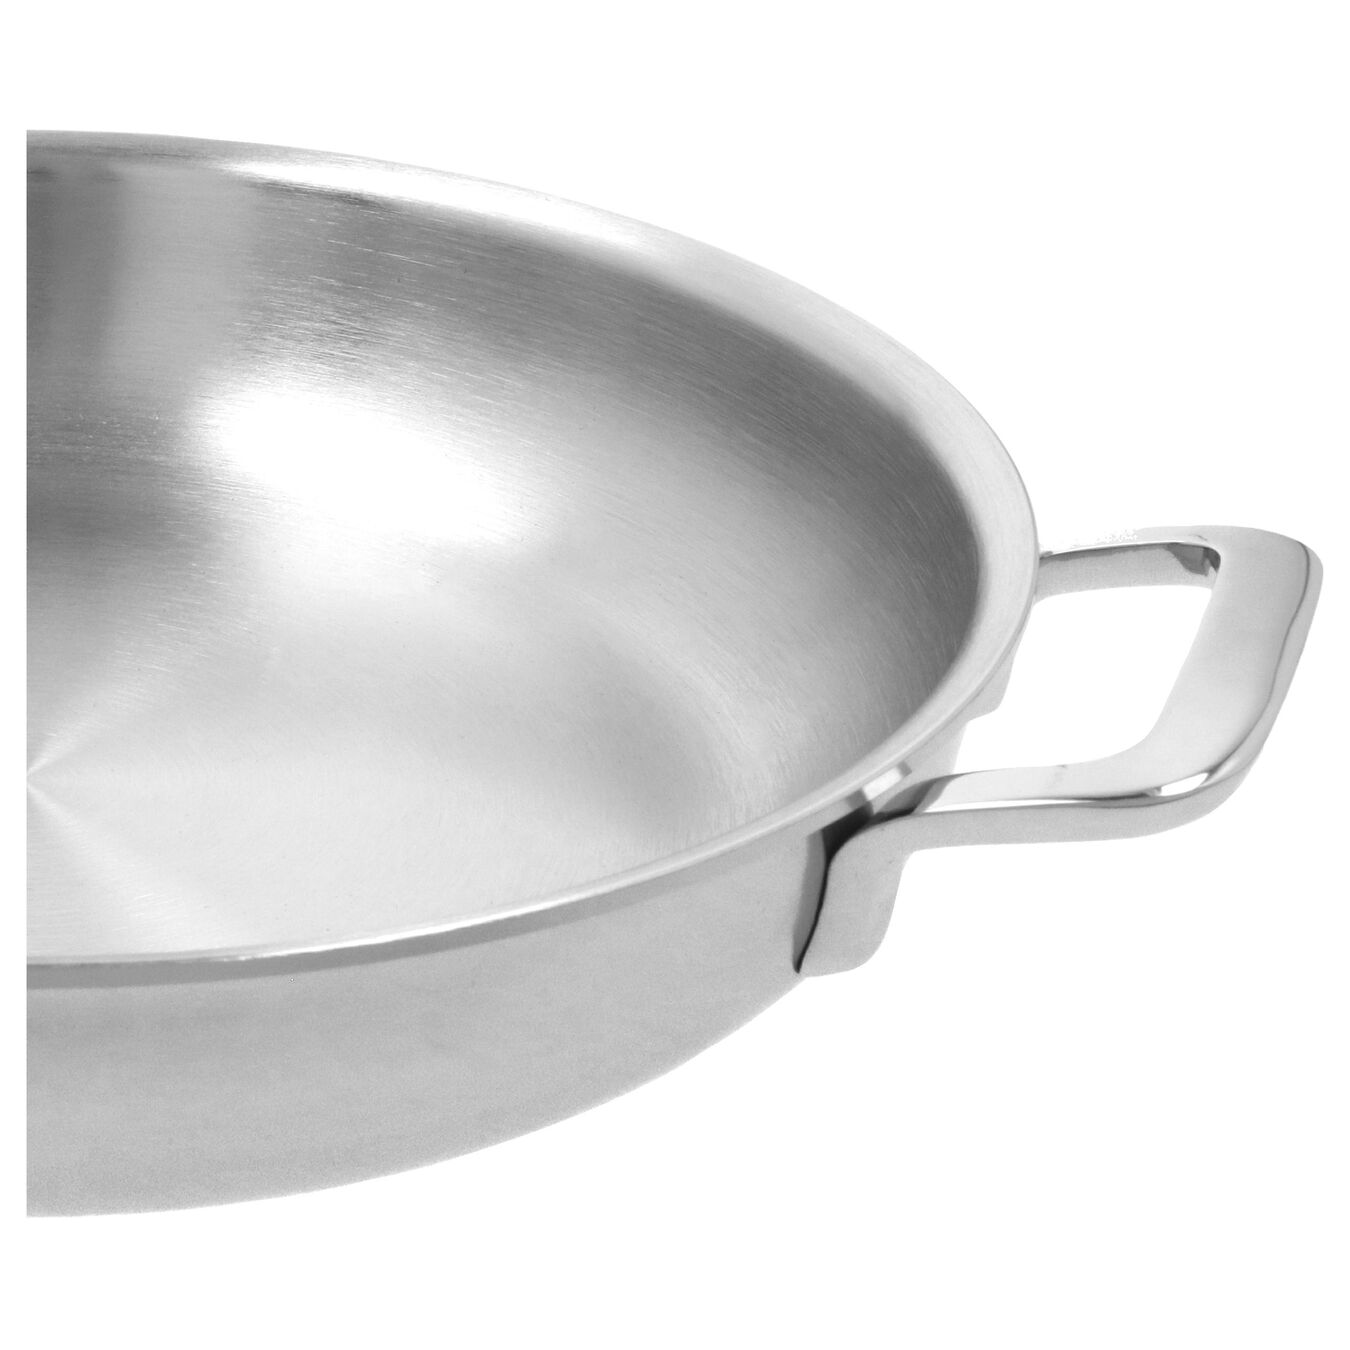 28 cm / 11 inch 18/10 Stainless Steel Frying pan with 2 handles,,large 5